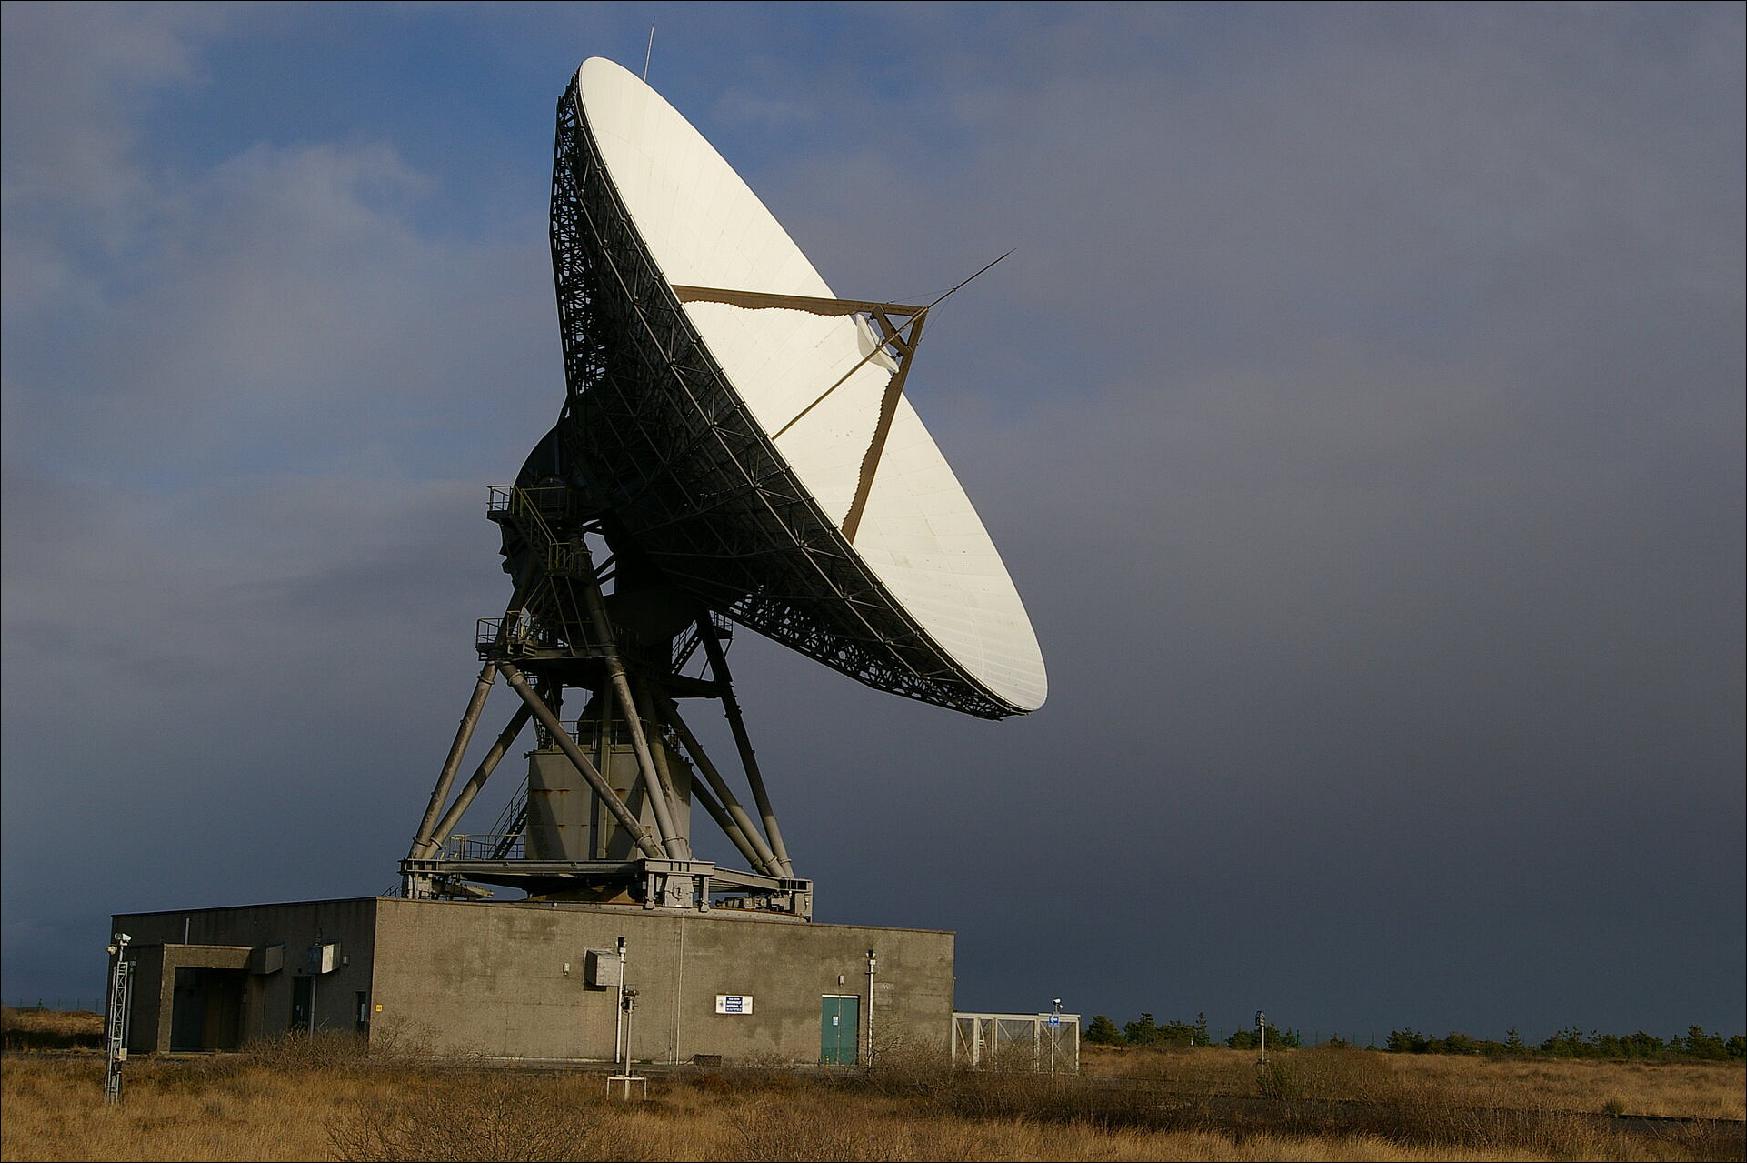 Figure 5: Ground station engineering teams at ESA are particularly excited by a new initiative aimed at redeveloping part of Goonhilly Earth Station, an existing commercial ground tracking station located in Cornwall, UK, to enable it to provide Europe's first deep-space tracking services on a commercial basis. Under the project, the station's GHY-6 antenna, built in 1985 and featuring a 32 m-diameter dish, will be upgraded under ESA technical oversight to provide high bit-rate data links for missions that travel far from Earth – typically exceeding 2 million km distance. These include not only missions to our somewhat closer Moon, but also to the more distant and scientifically important Sun-Earth Lagrange points, to asteroids and to planetary destinations like Mars (image credit: GES - Goonhilly Earth Station Ltd.)